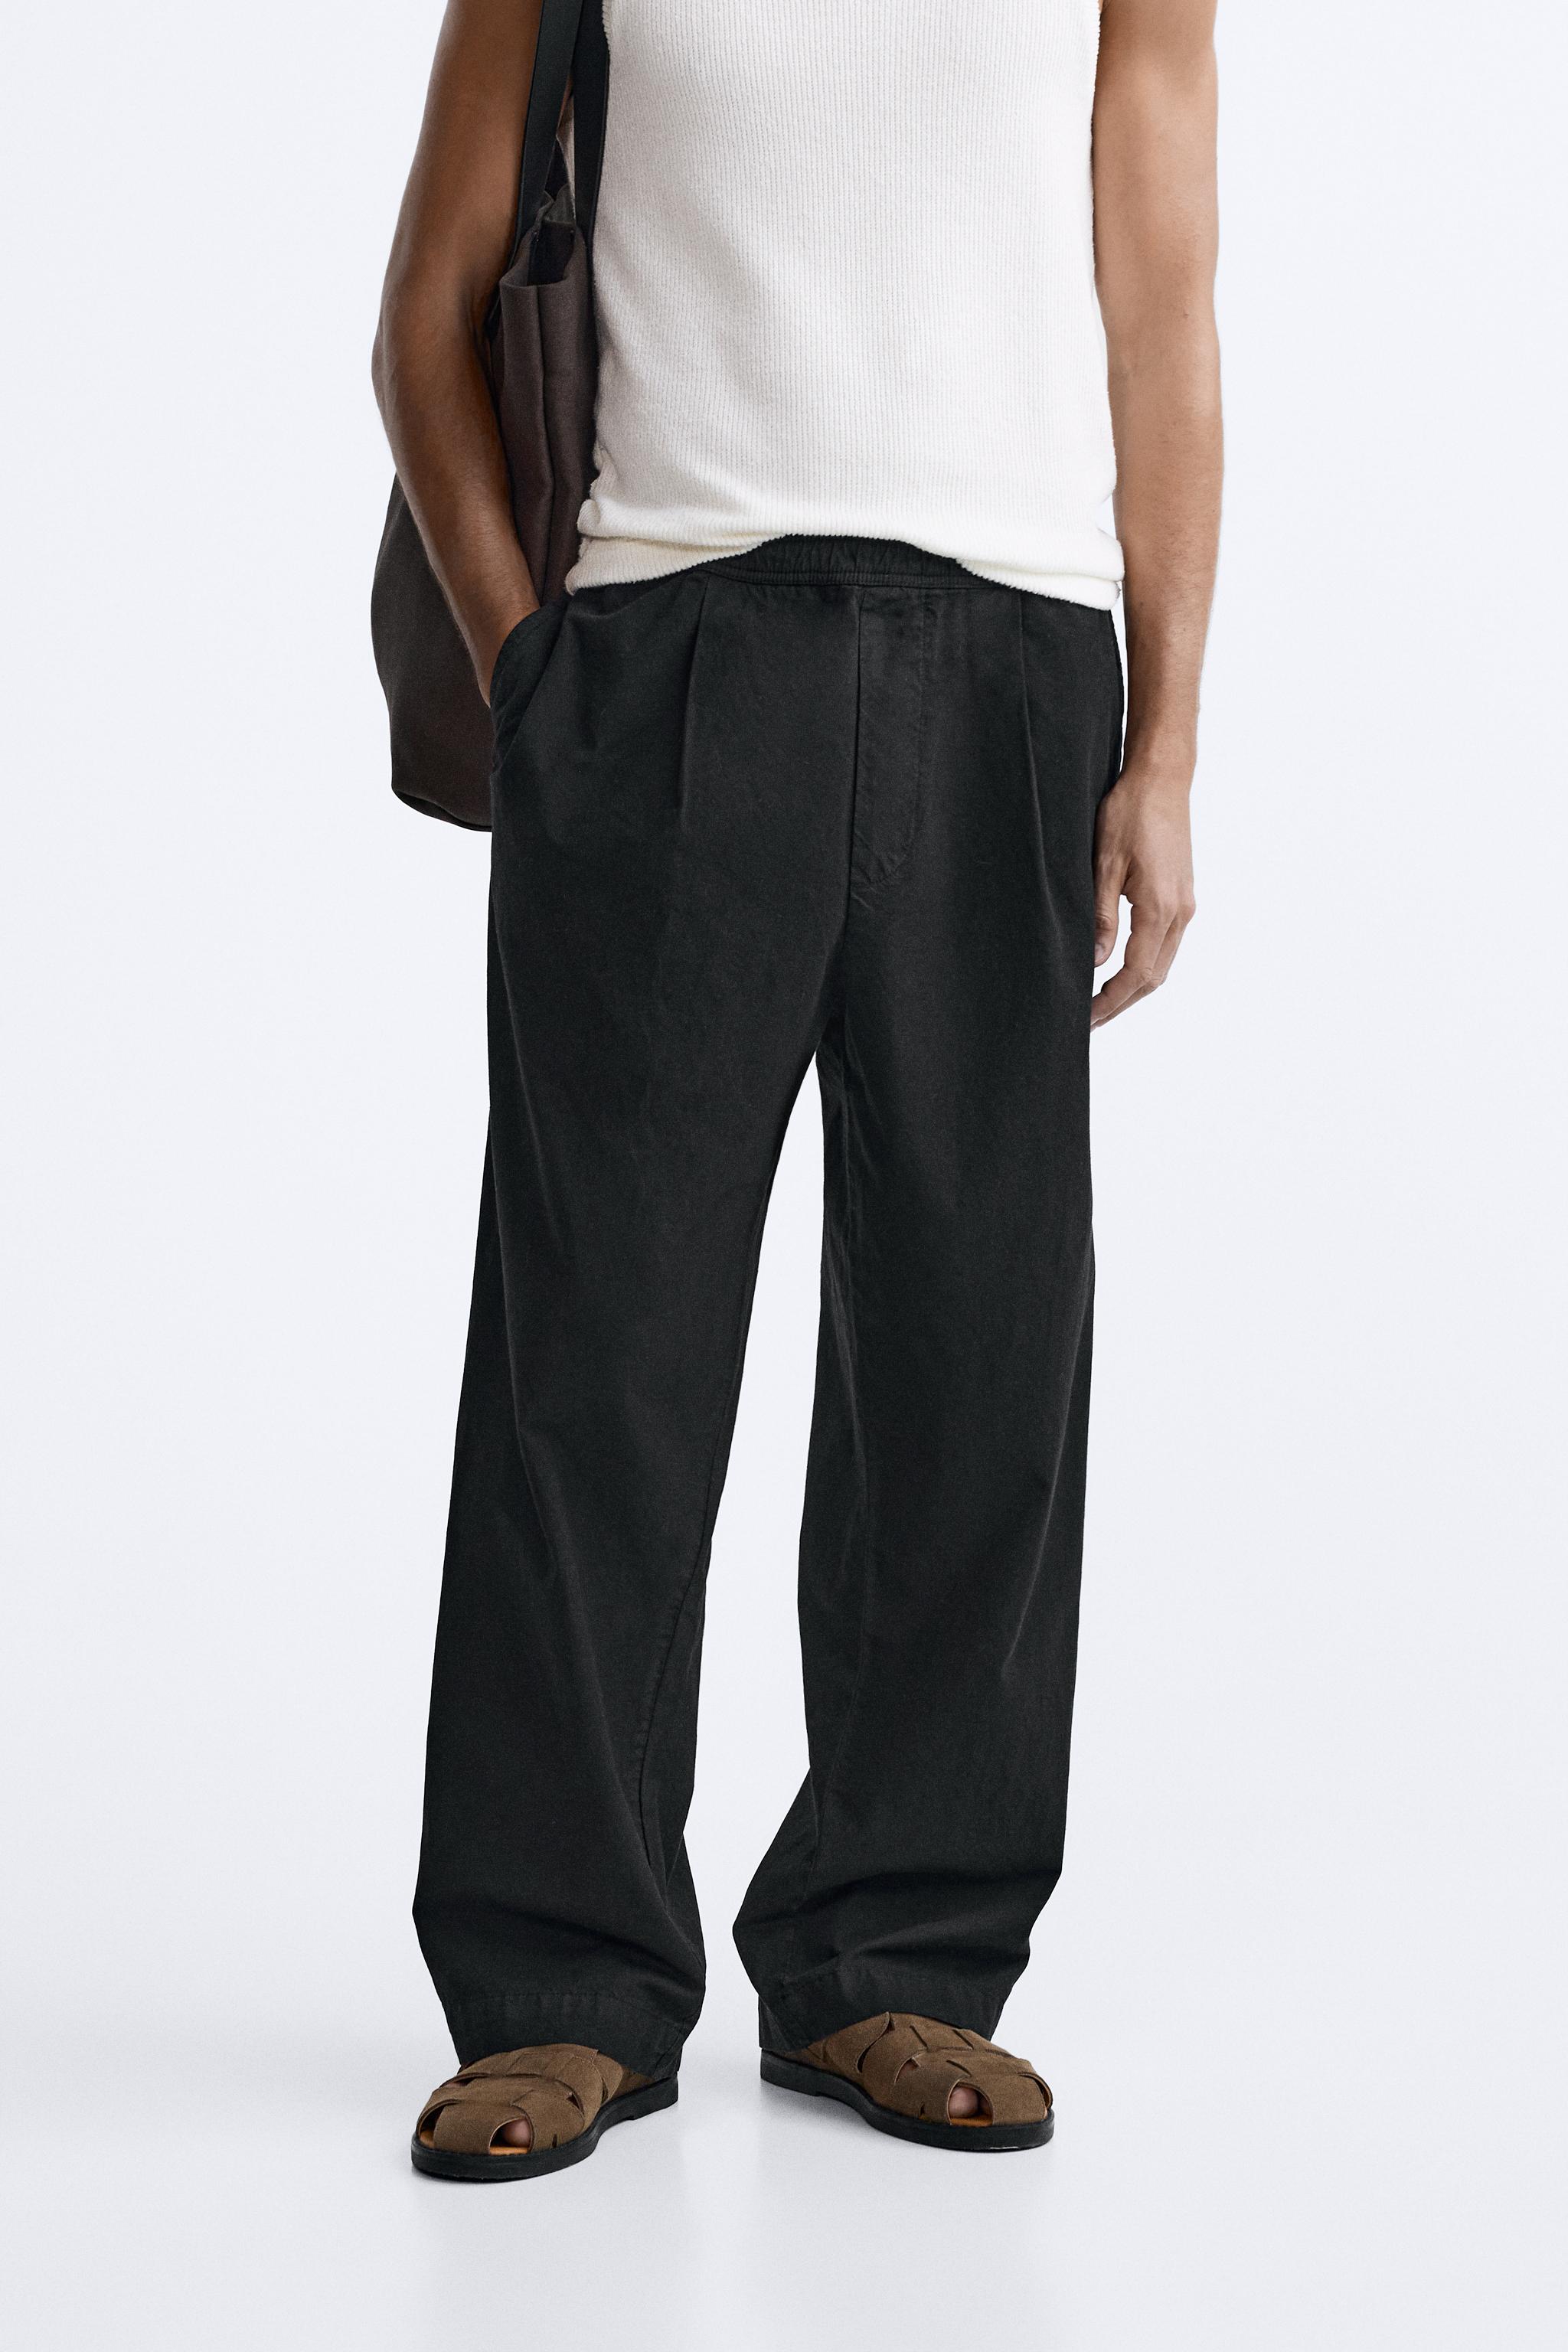 Men's Pants Fashion Straight Tube Trousers Loose Fitting Casual With  Cropped Wide Leg Outdoor Sport Sweatpants